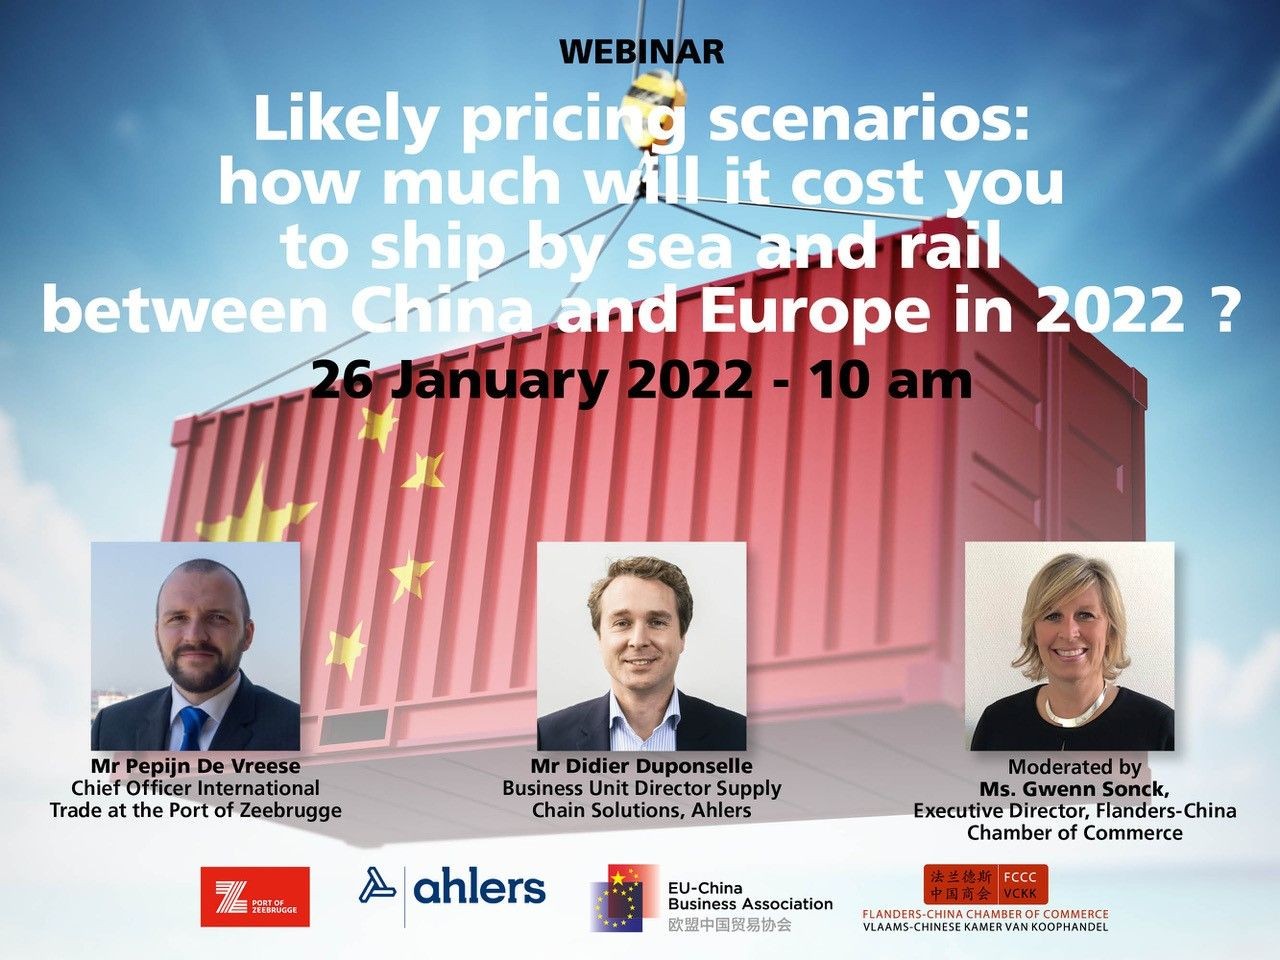 Webinar: Likely pricing scenarios: how much will it cost you to ship by sea and rail between Europe and China in 2022?